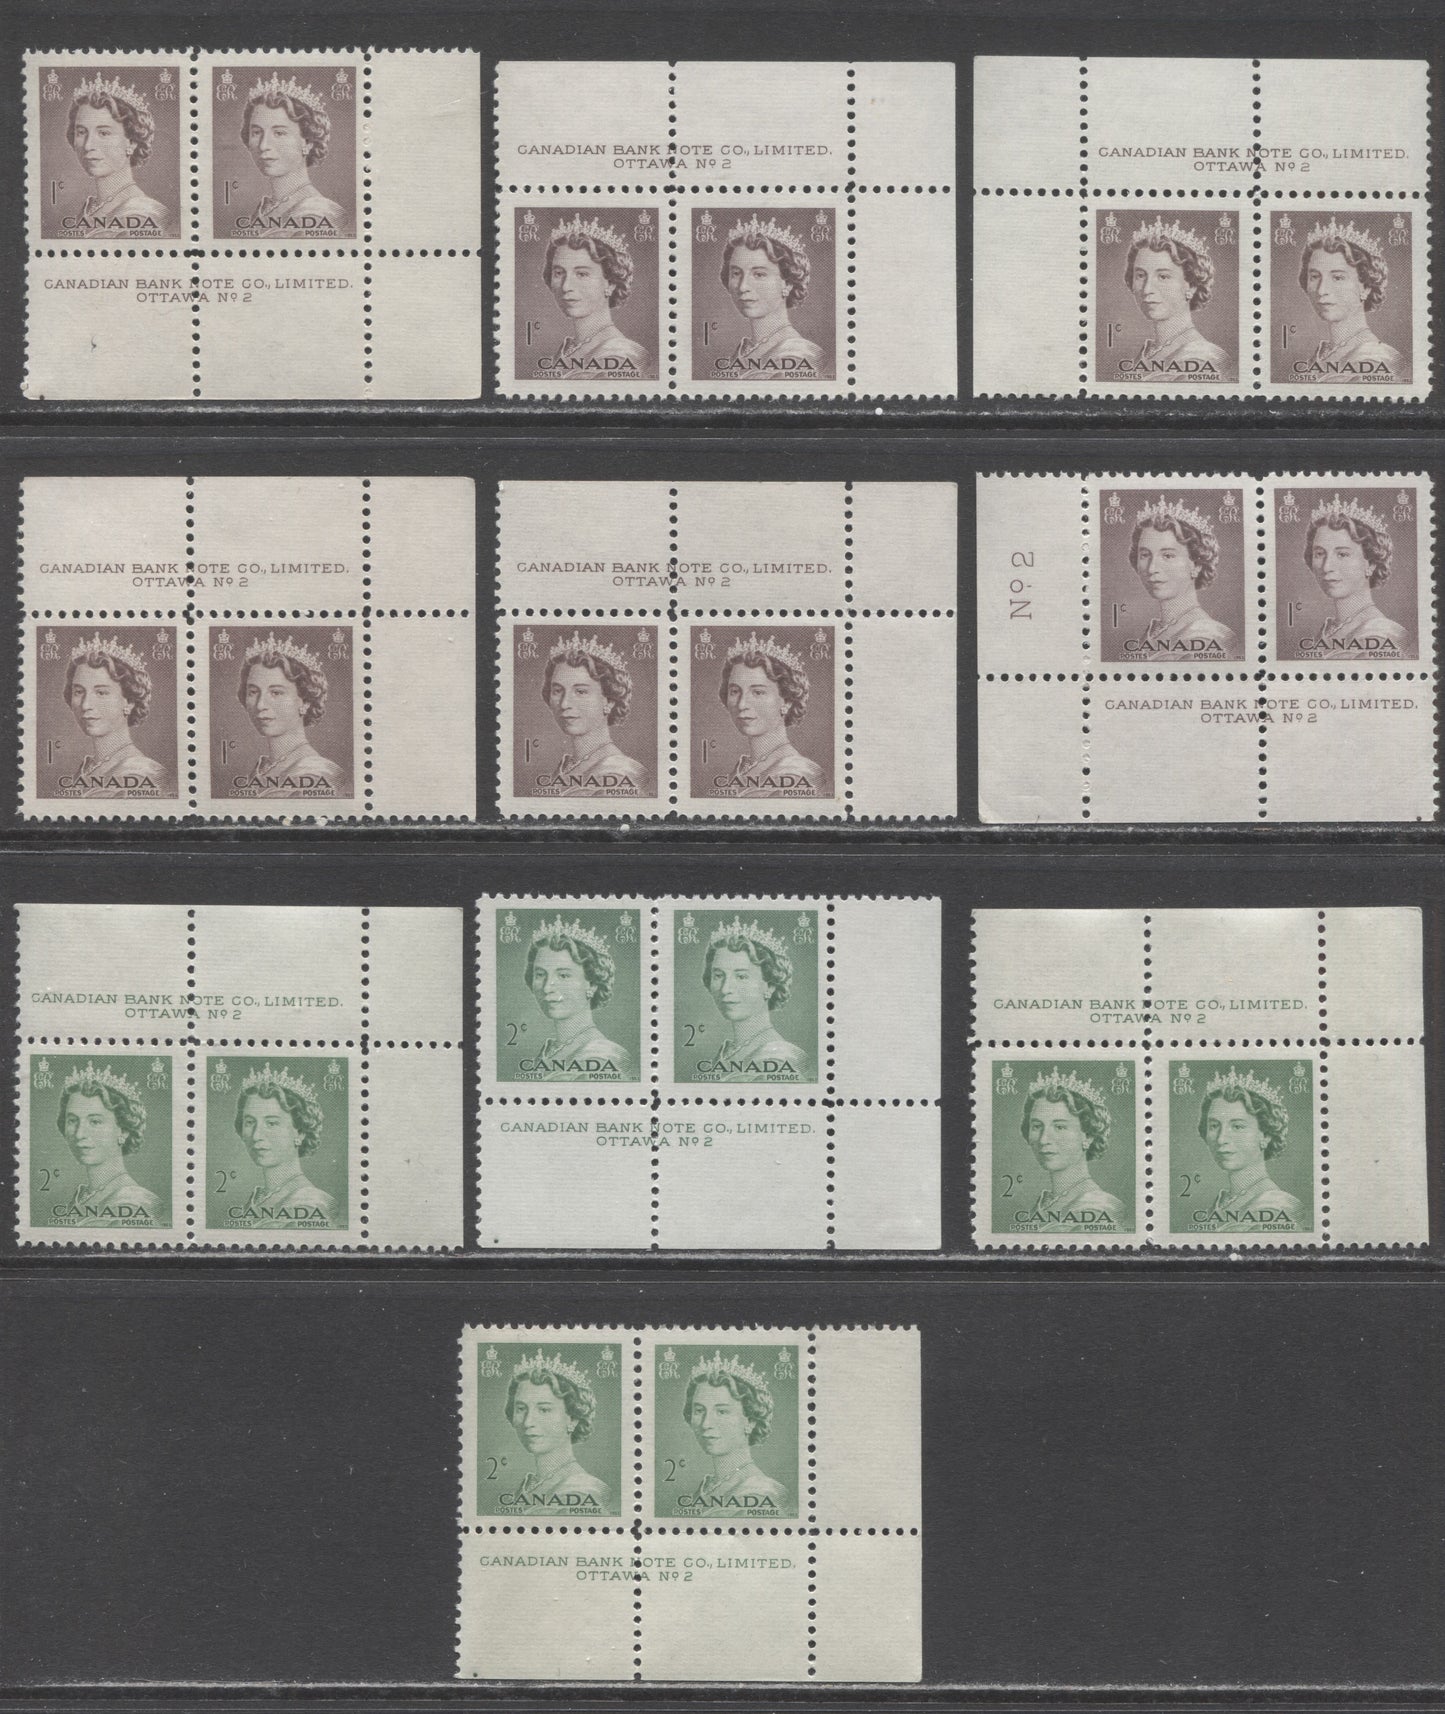 Lot 233 Canada #325-326 1c-2c Violet Brown & Pale Green Queen Elizabeth II, 1953-1954 Karsh Issue, 10 VFNH Plate 2 Inscription Pairs, Different Perfs